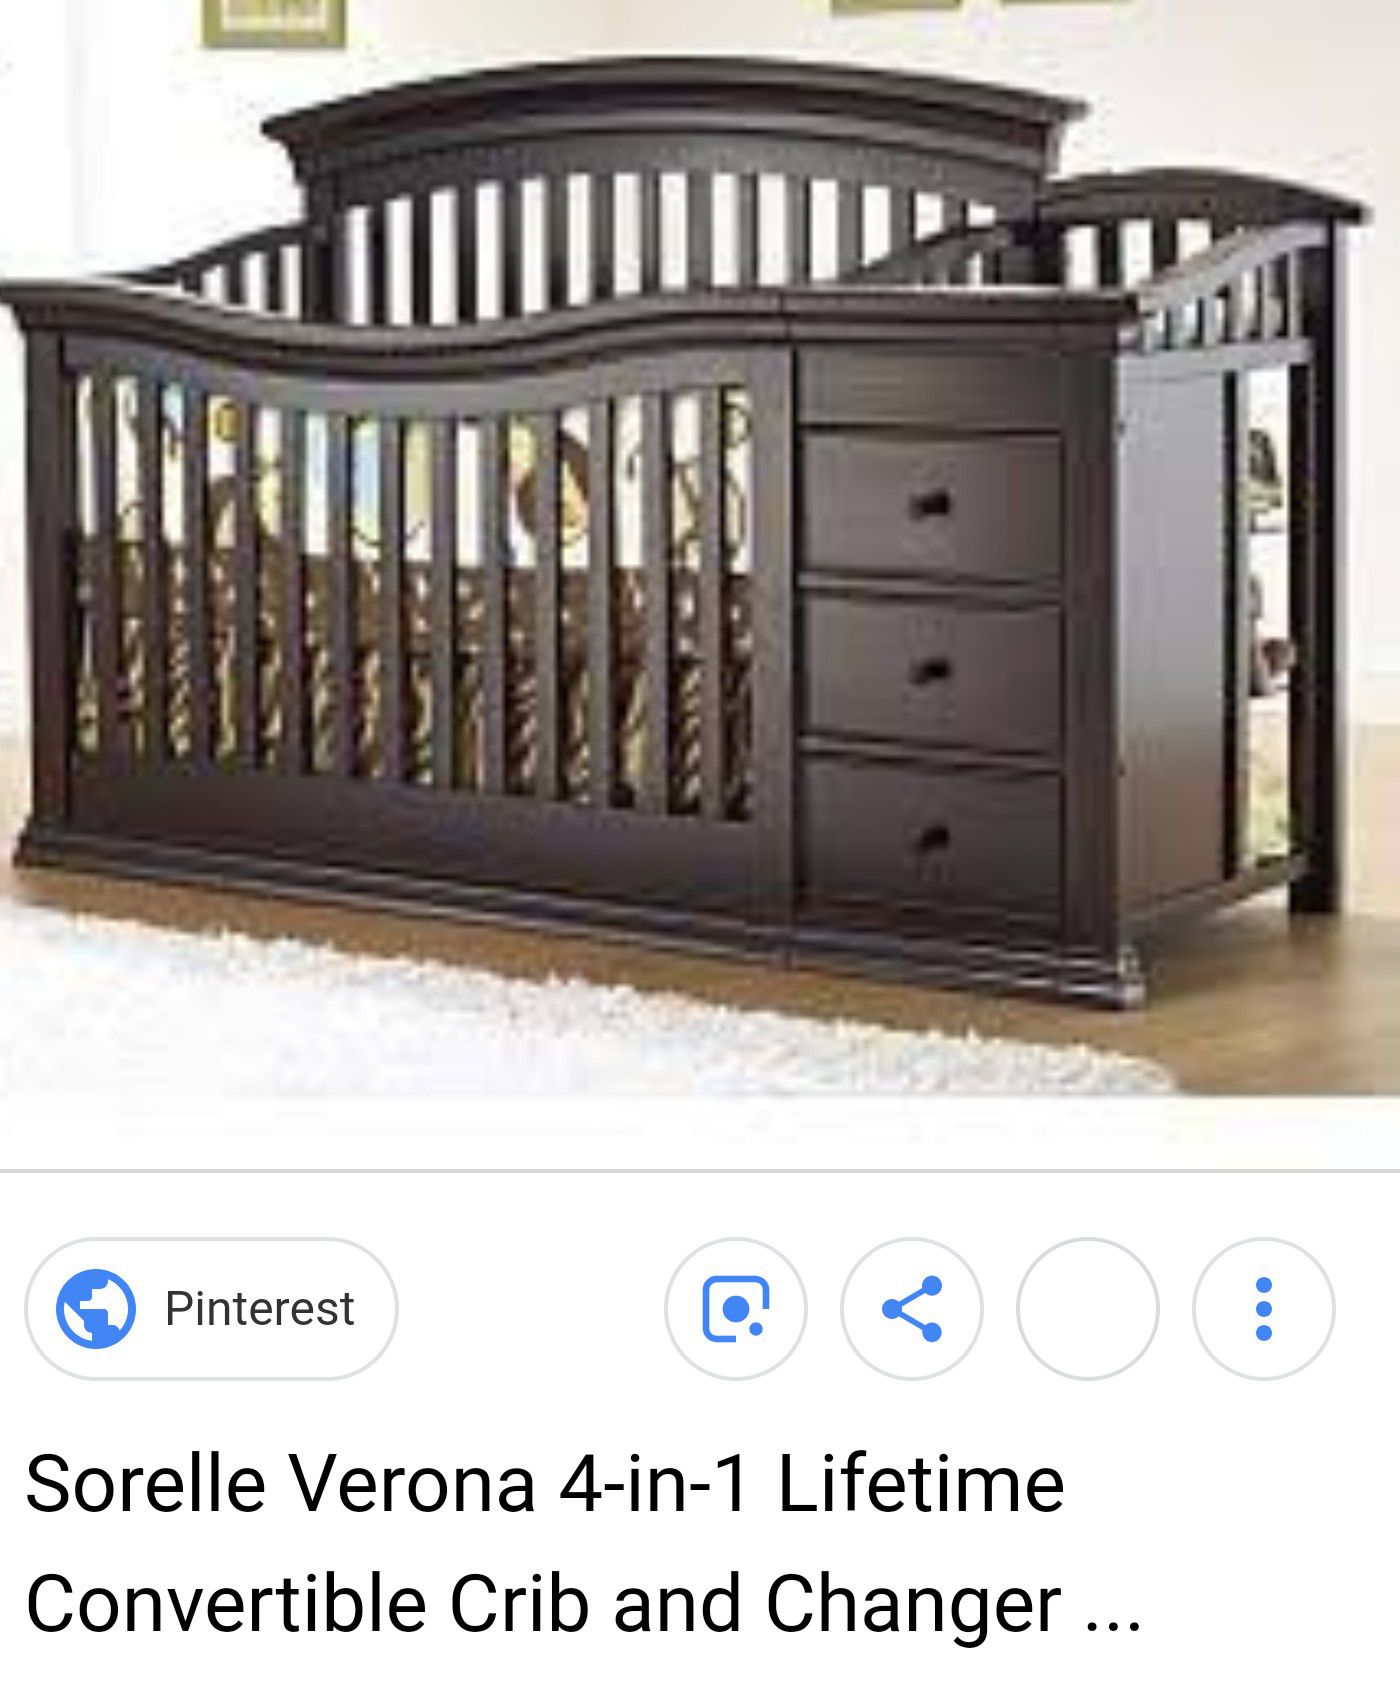 Convertible Crib plus changing table